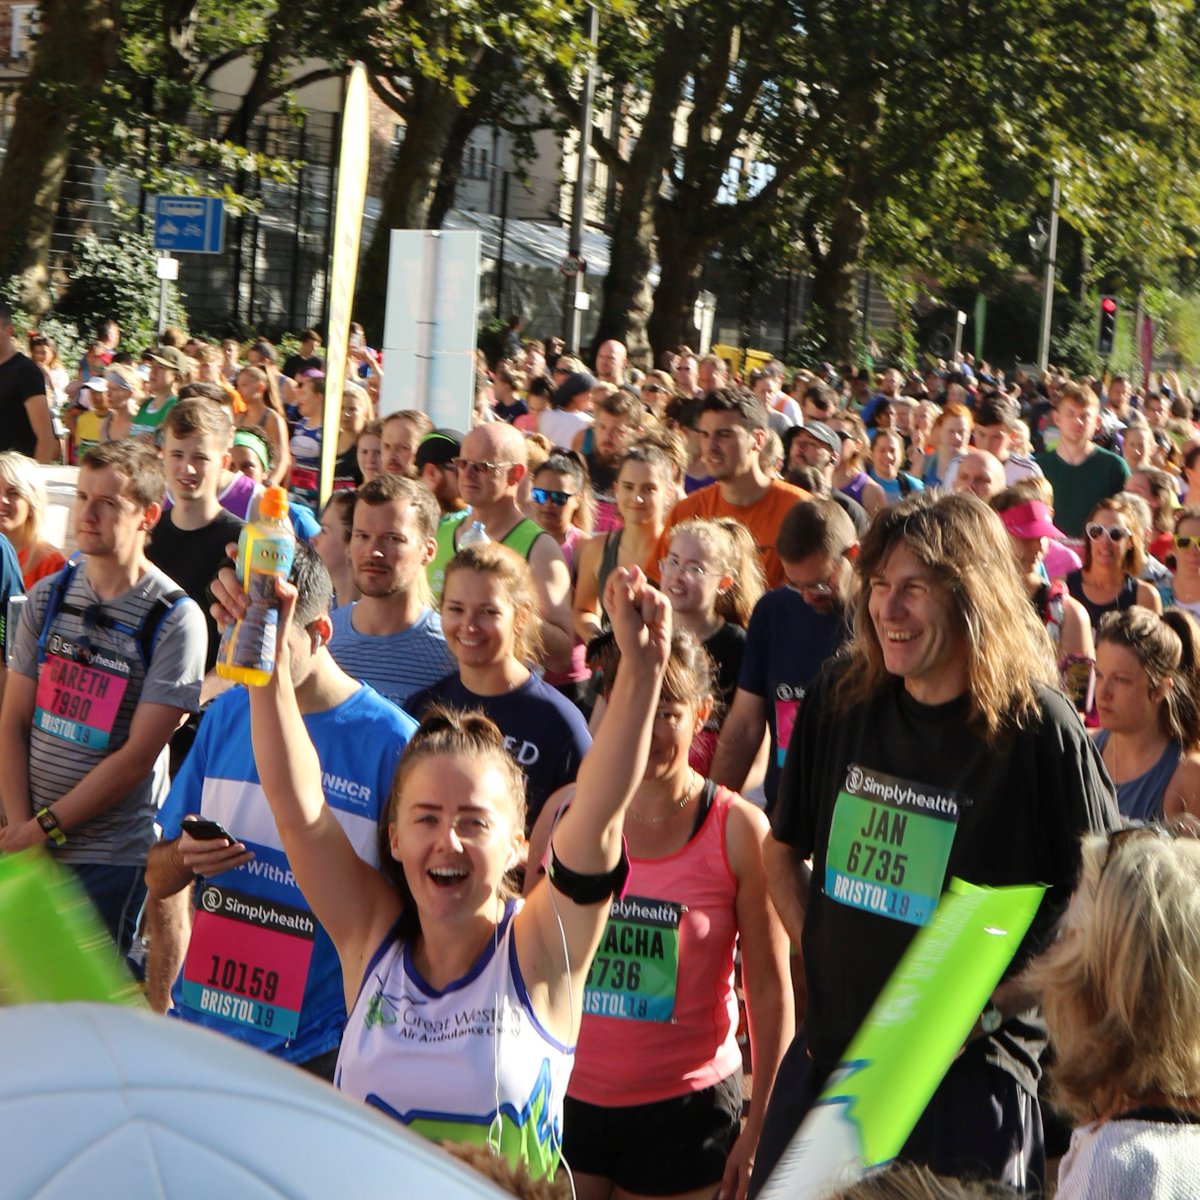 Less than a week until the #GreatBristolRun - don't forget to wear one clothing item to take off at the start line, we will collect it and either recycle it or sell it in one of our shops!

If you aren't running - make sure to tell someone you know that is!